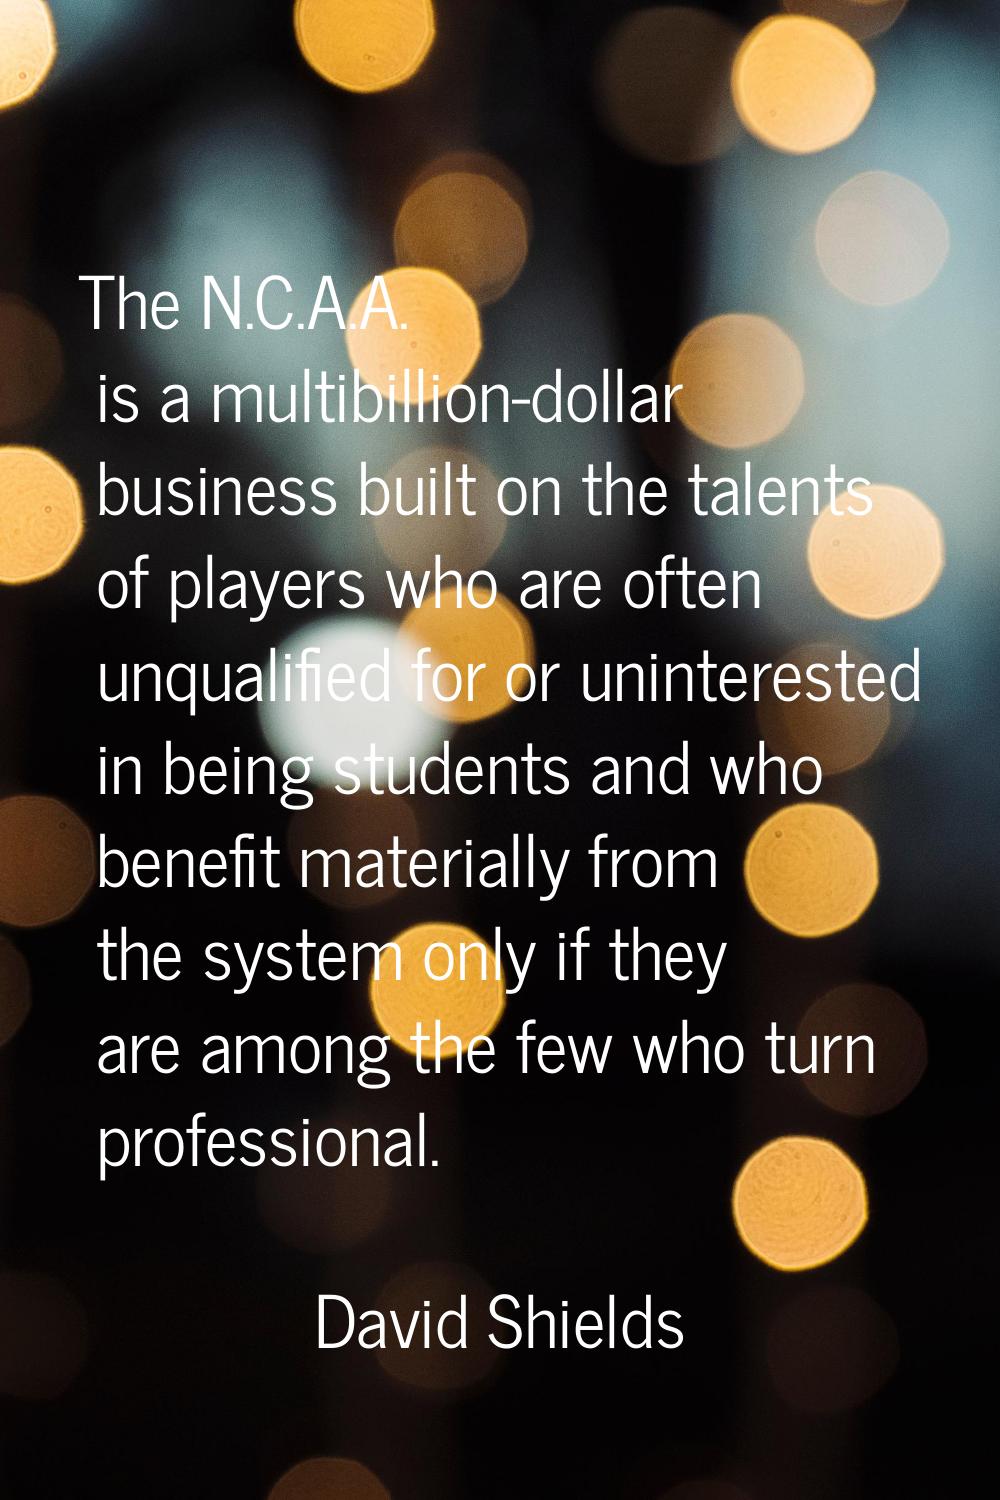 The N.C.A.A. is a multibillion-dollar business built on the talents of players who are often unqual